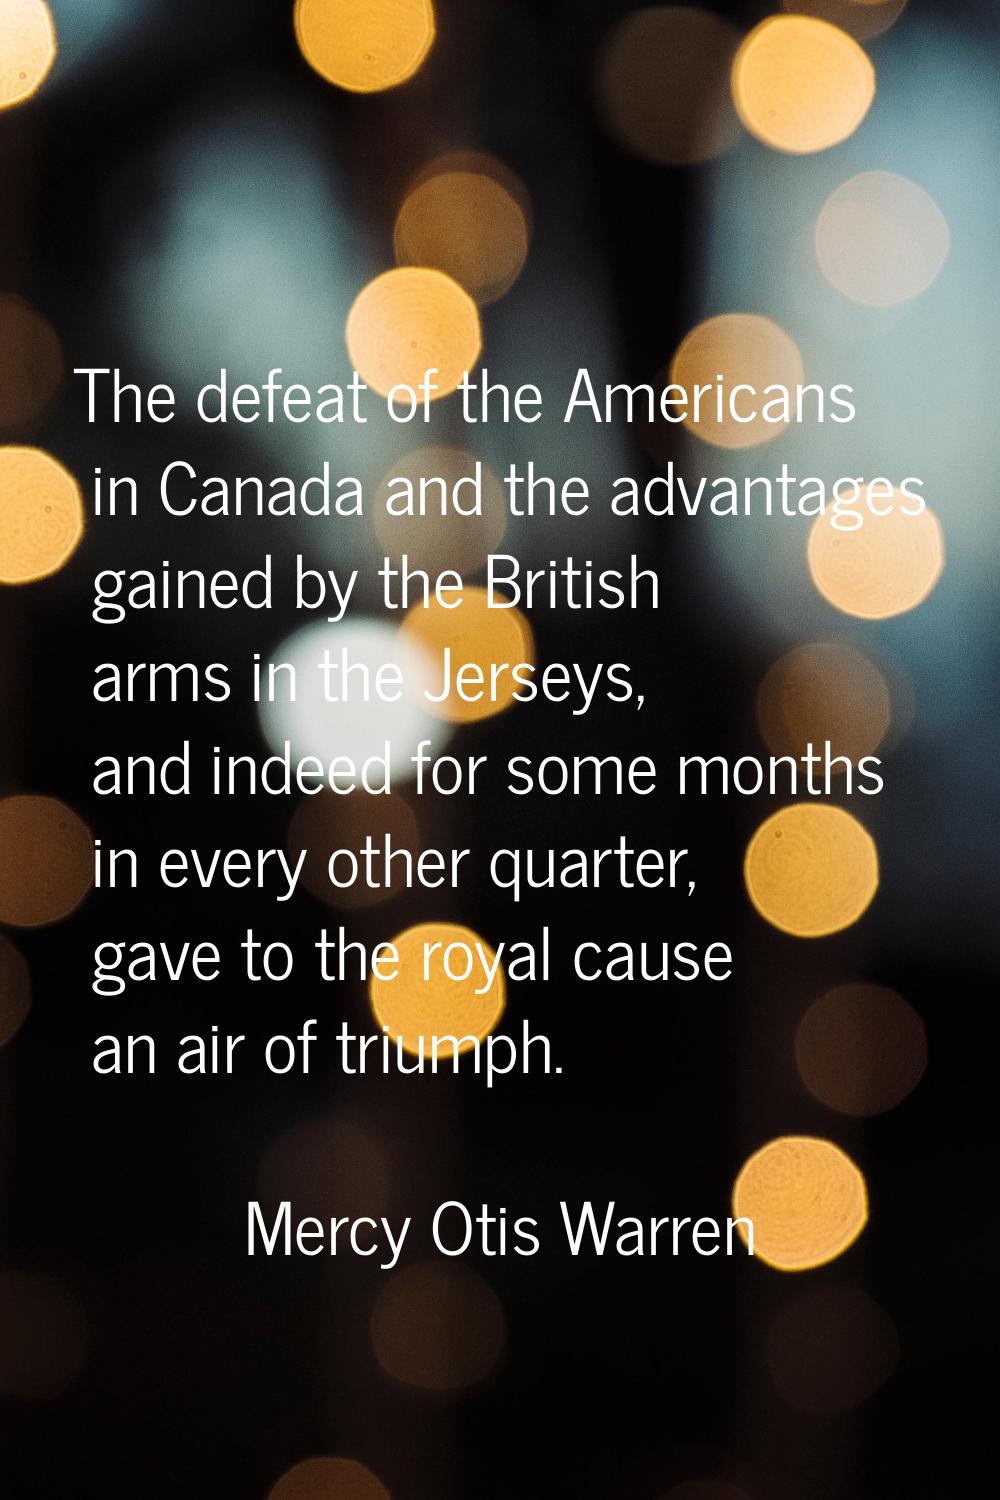 The defeat of the Americans in Canada and the advantages gained by the British arms in the Jerseys,